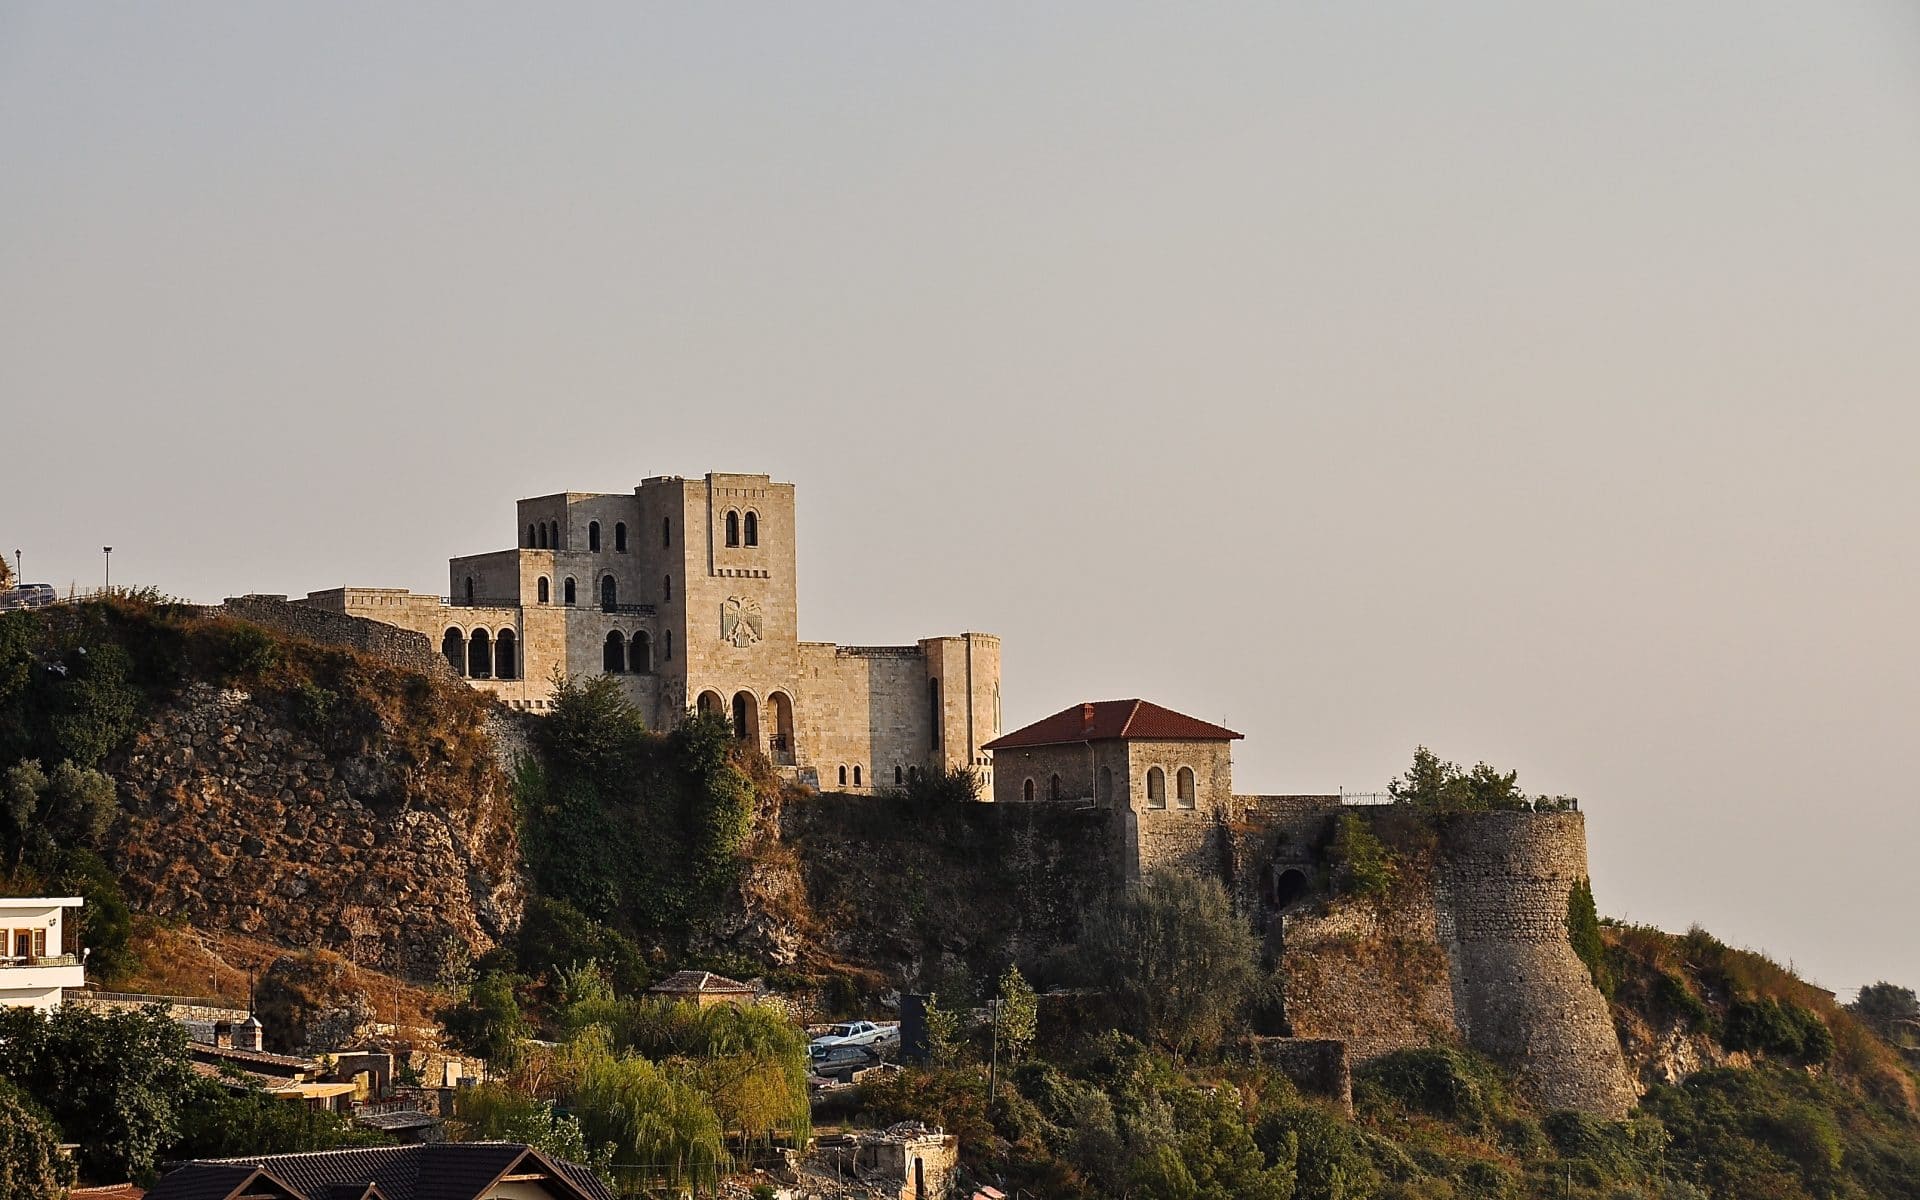 What to visit in Kruja